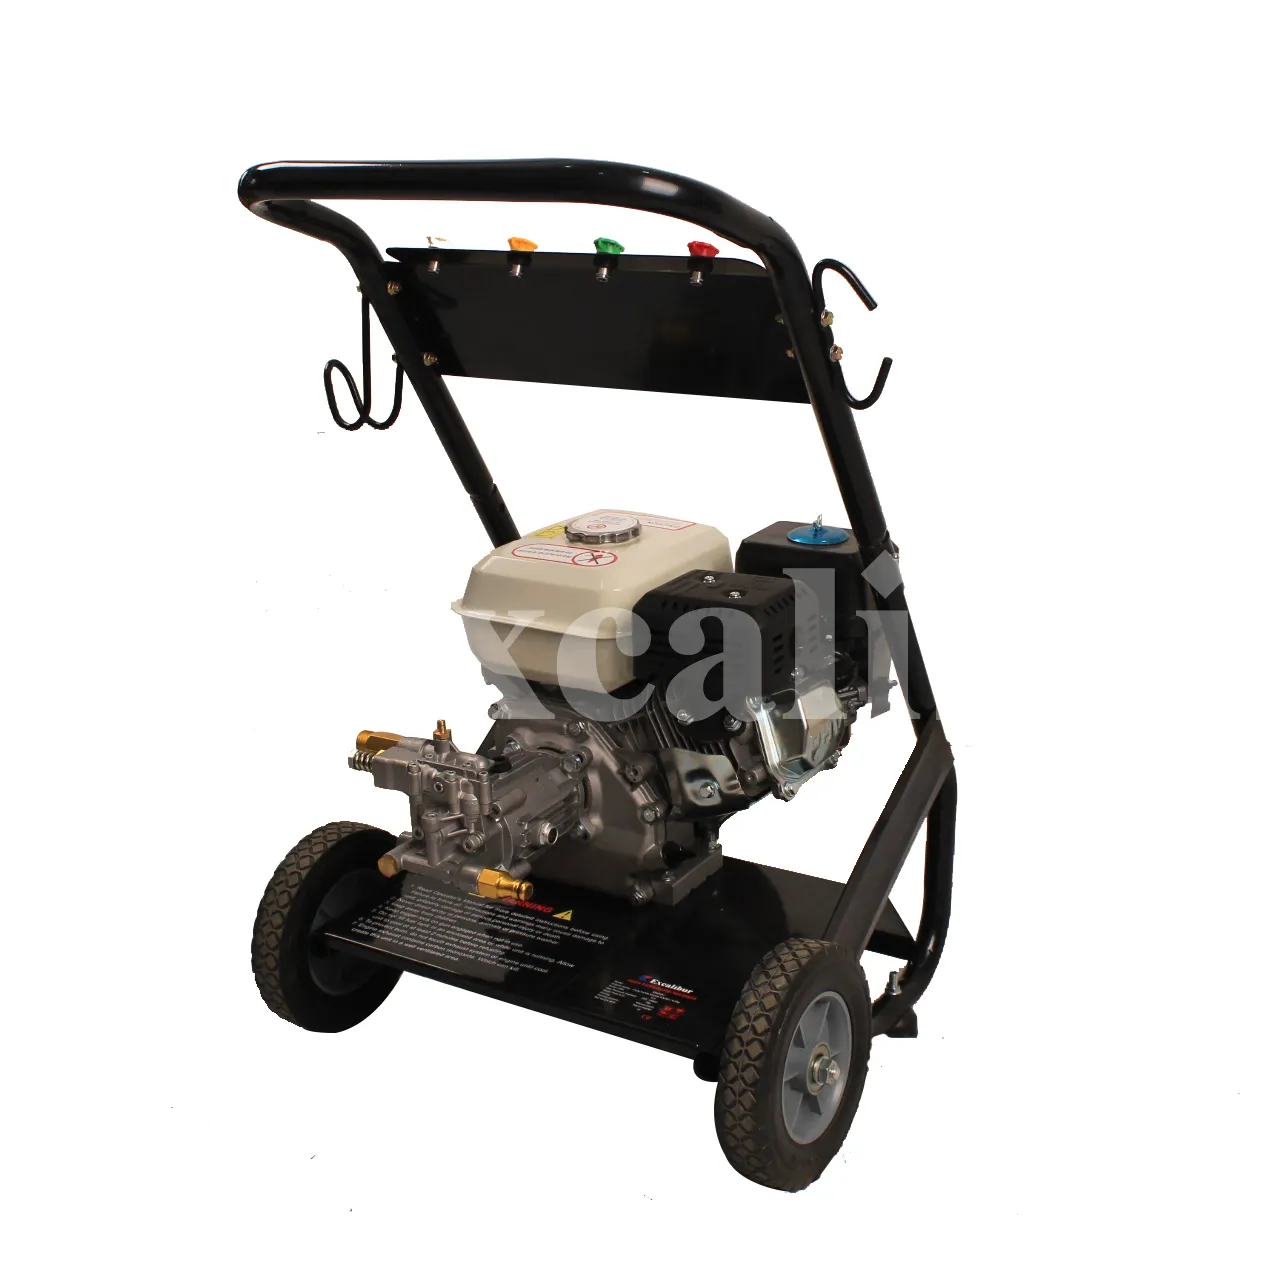 Excalibur High Pressure Washer Water Pump Cleaner SW2900 30mpa Max. Pressure Dirty Cleaning 6.5HP Gasoline Engine 700*450*480mm